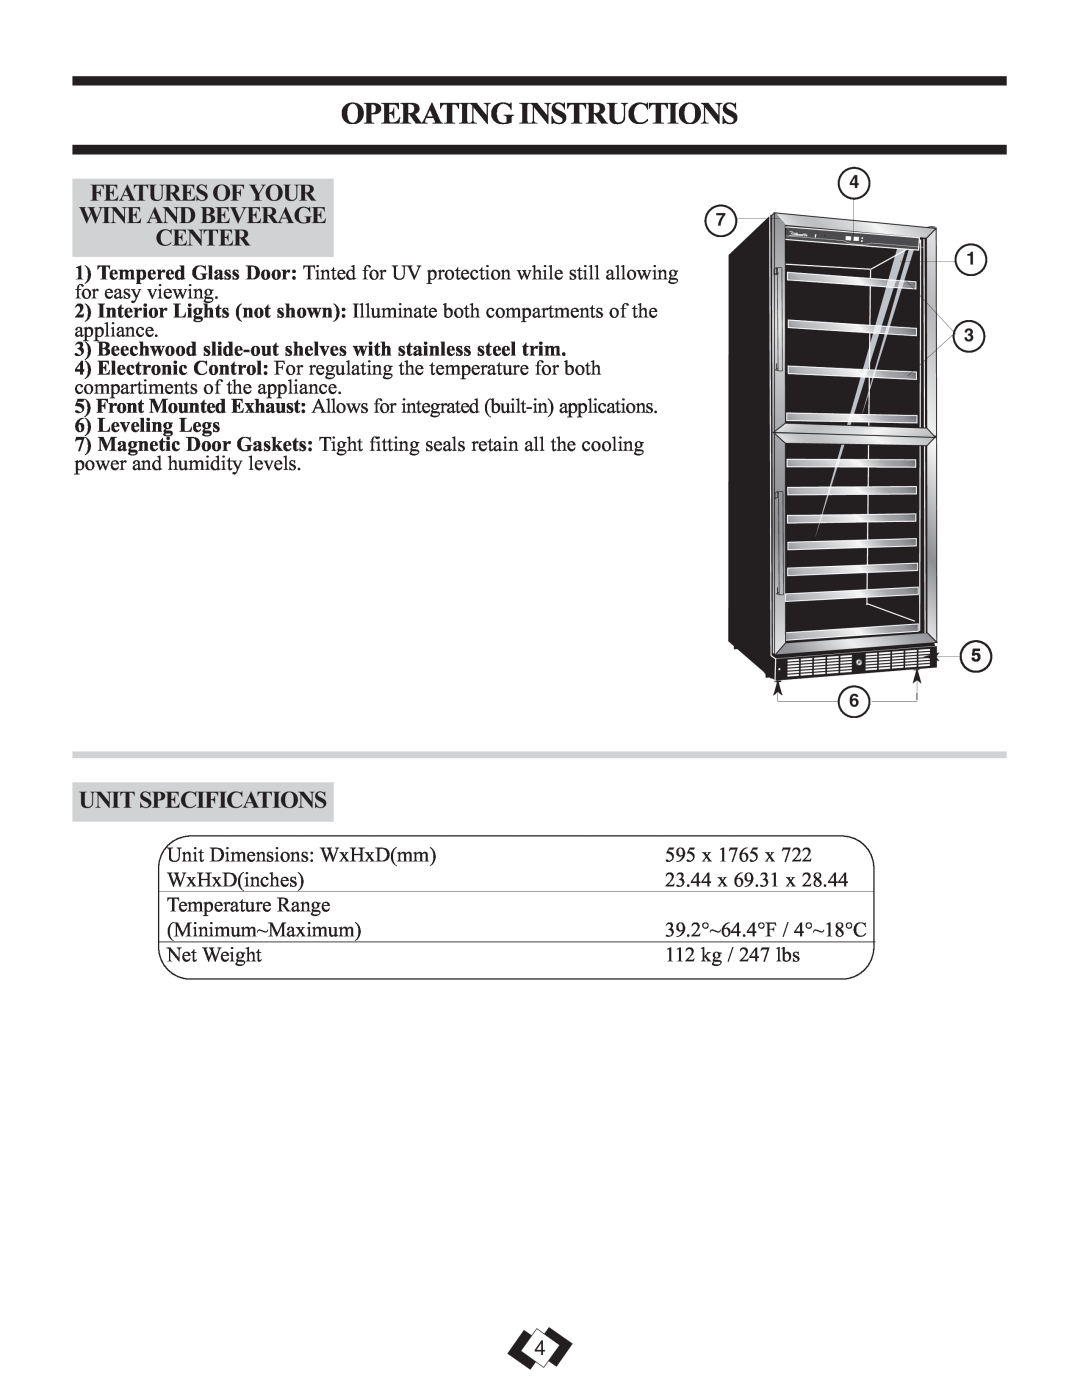 Danby DWBC14BLS Operating Instructions, Unit Specifications, Features Of Your, Wine And Beverage, Center, Leveling Legs 